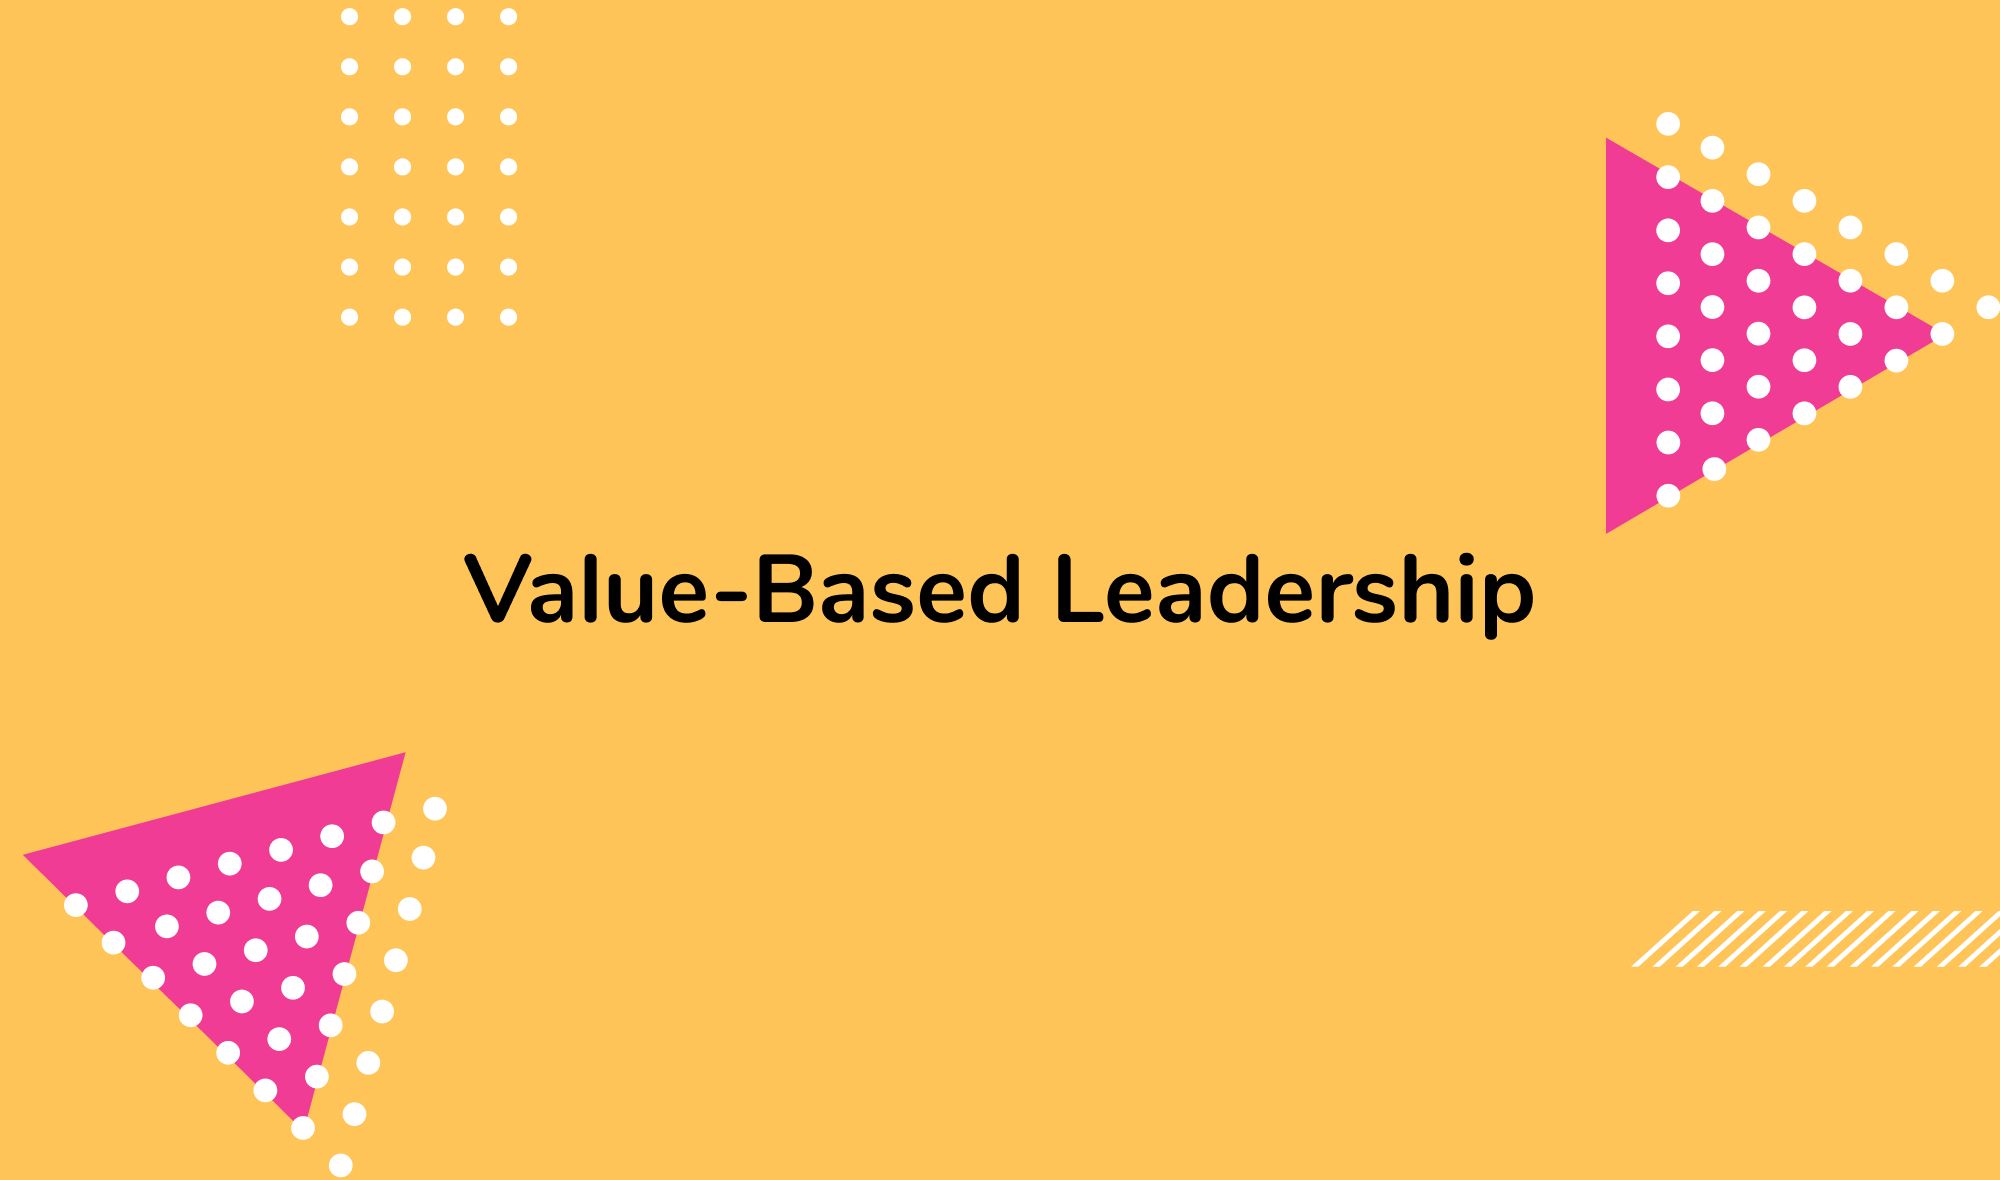 Value-Based Leadership: The Power of Aligning Leadership and Personal Values